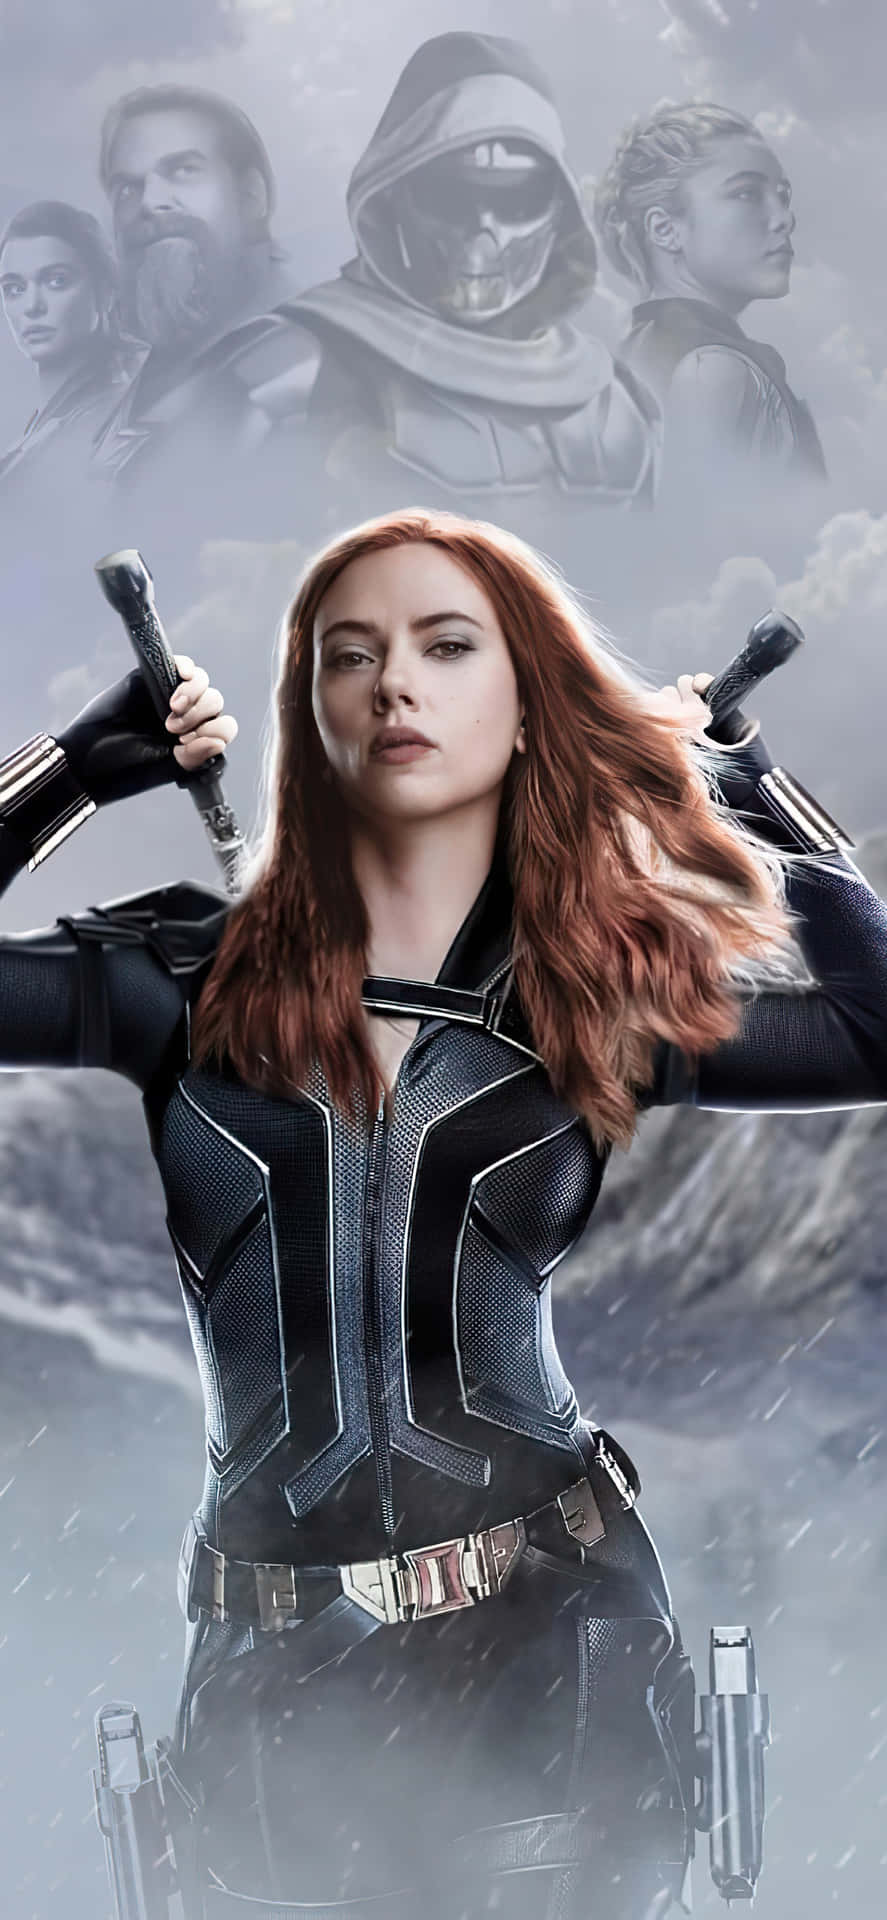 Download Black Widow Poster With A Woman Holding A Gun Wallpaper ...